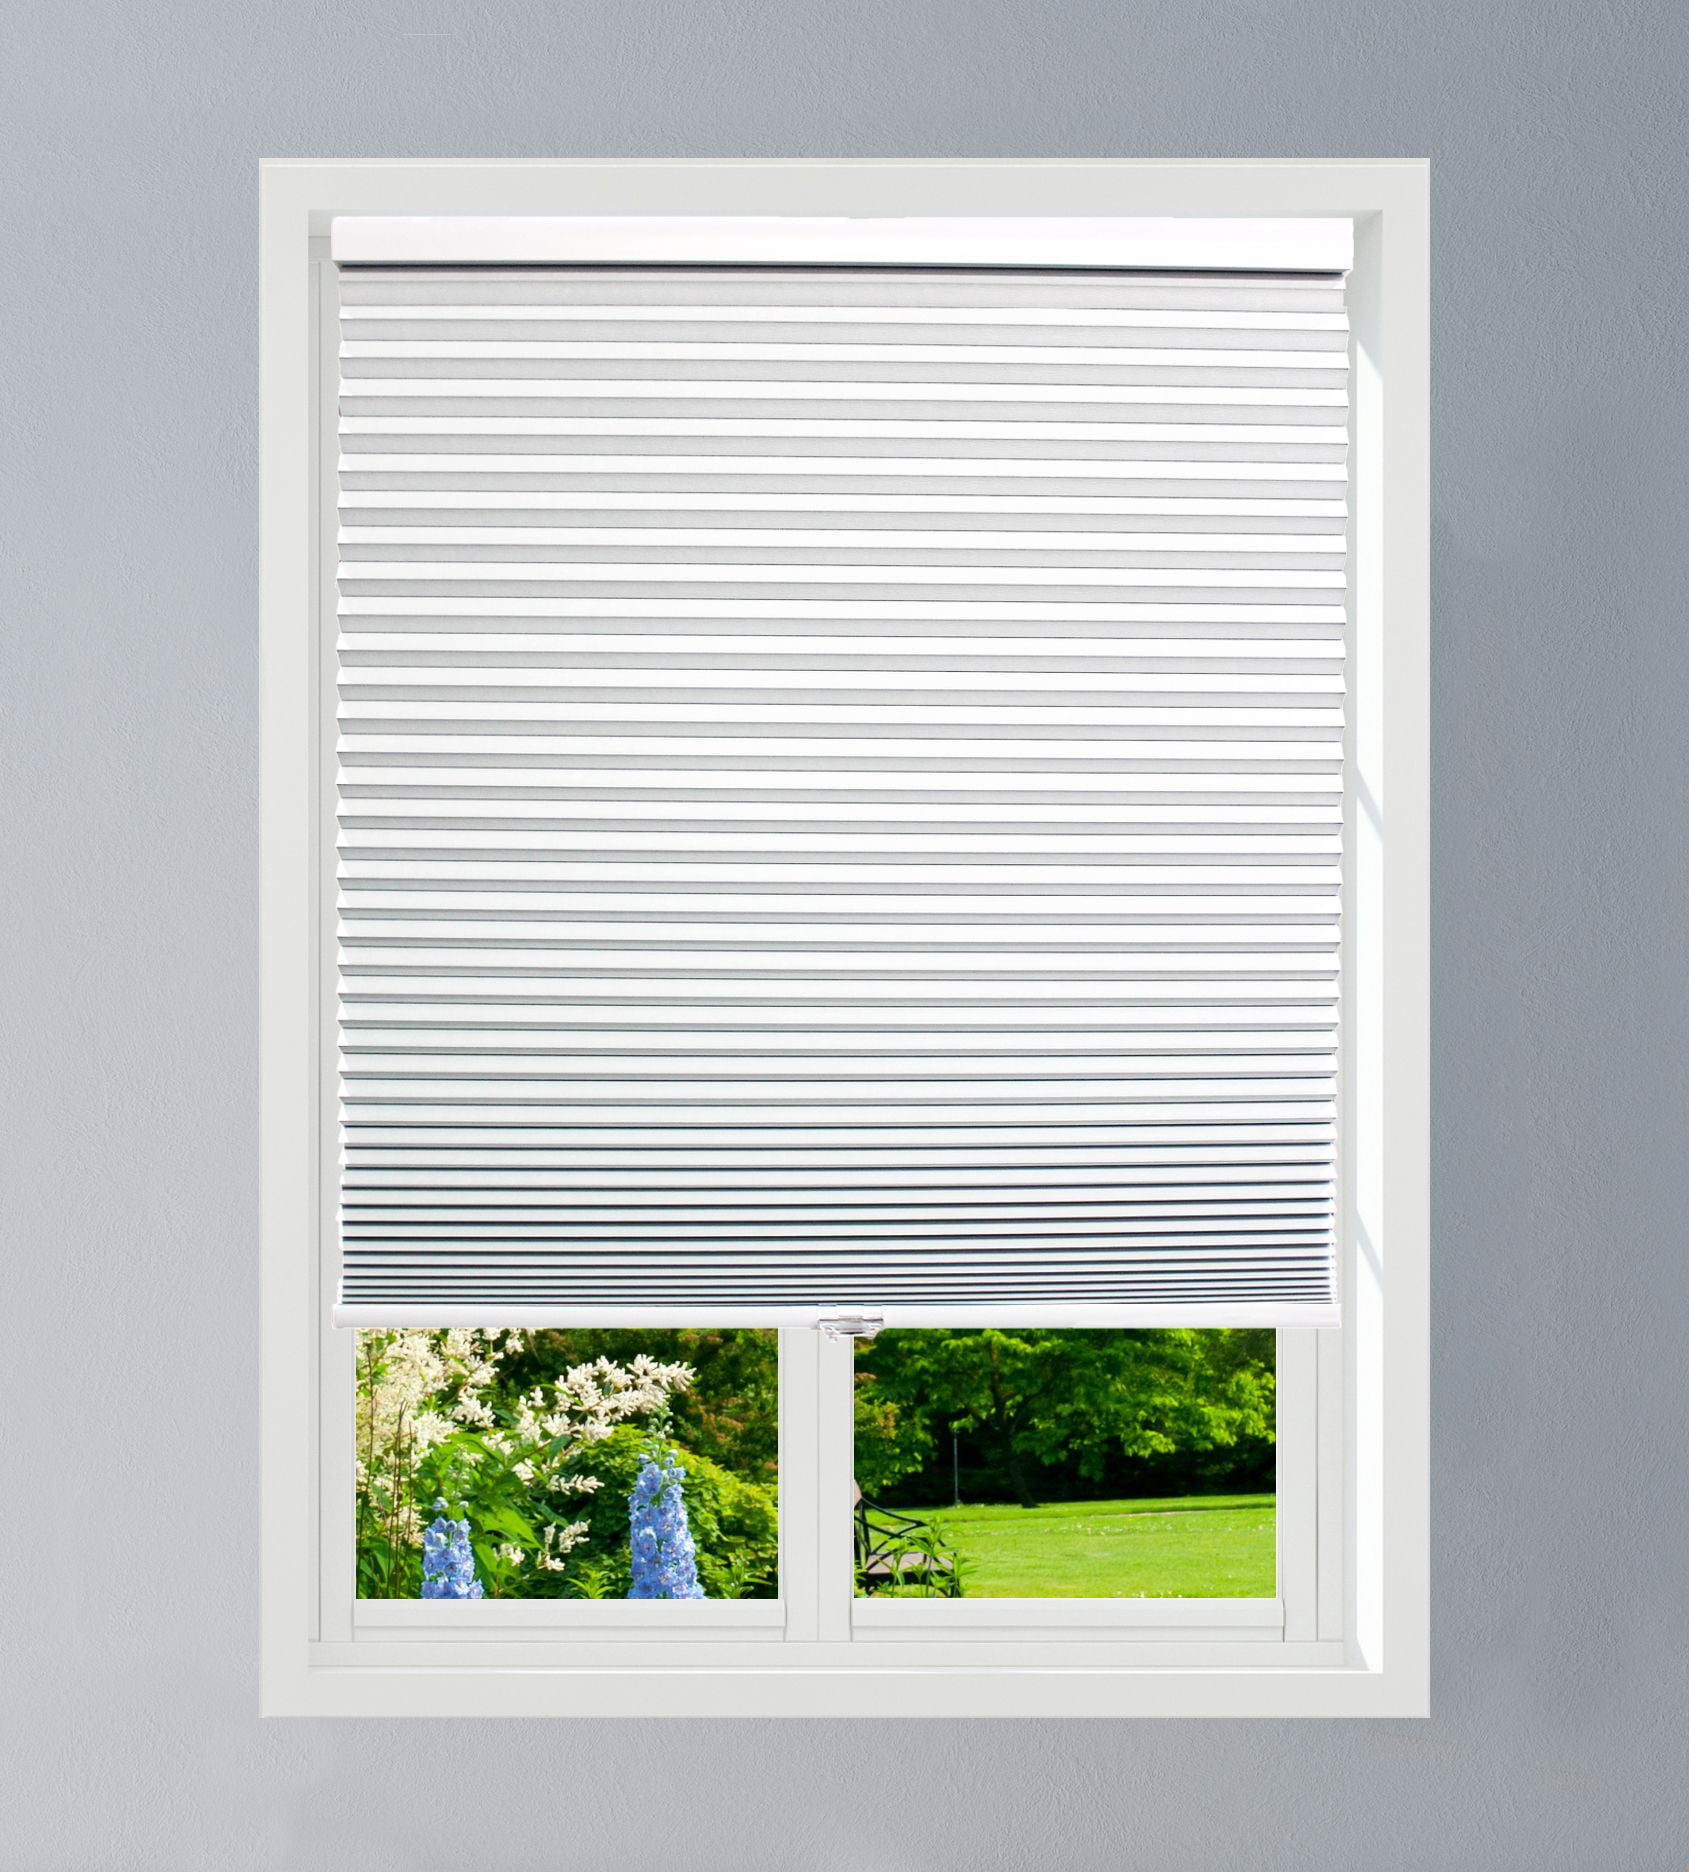 Gray Sheen New Age Blinds Room Darkening Inside Frame Mount Cordless Cellular Shade 43-1/2 x 48-Inch